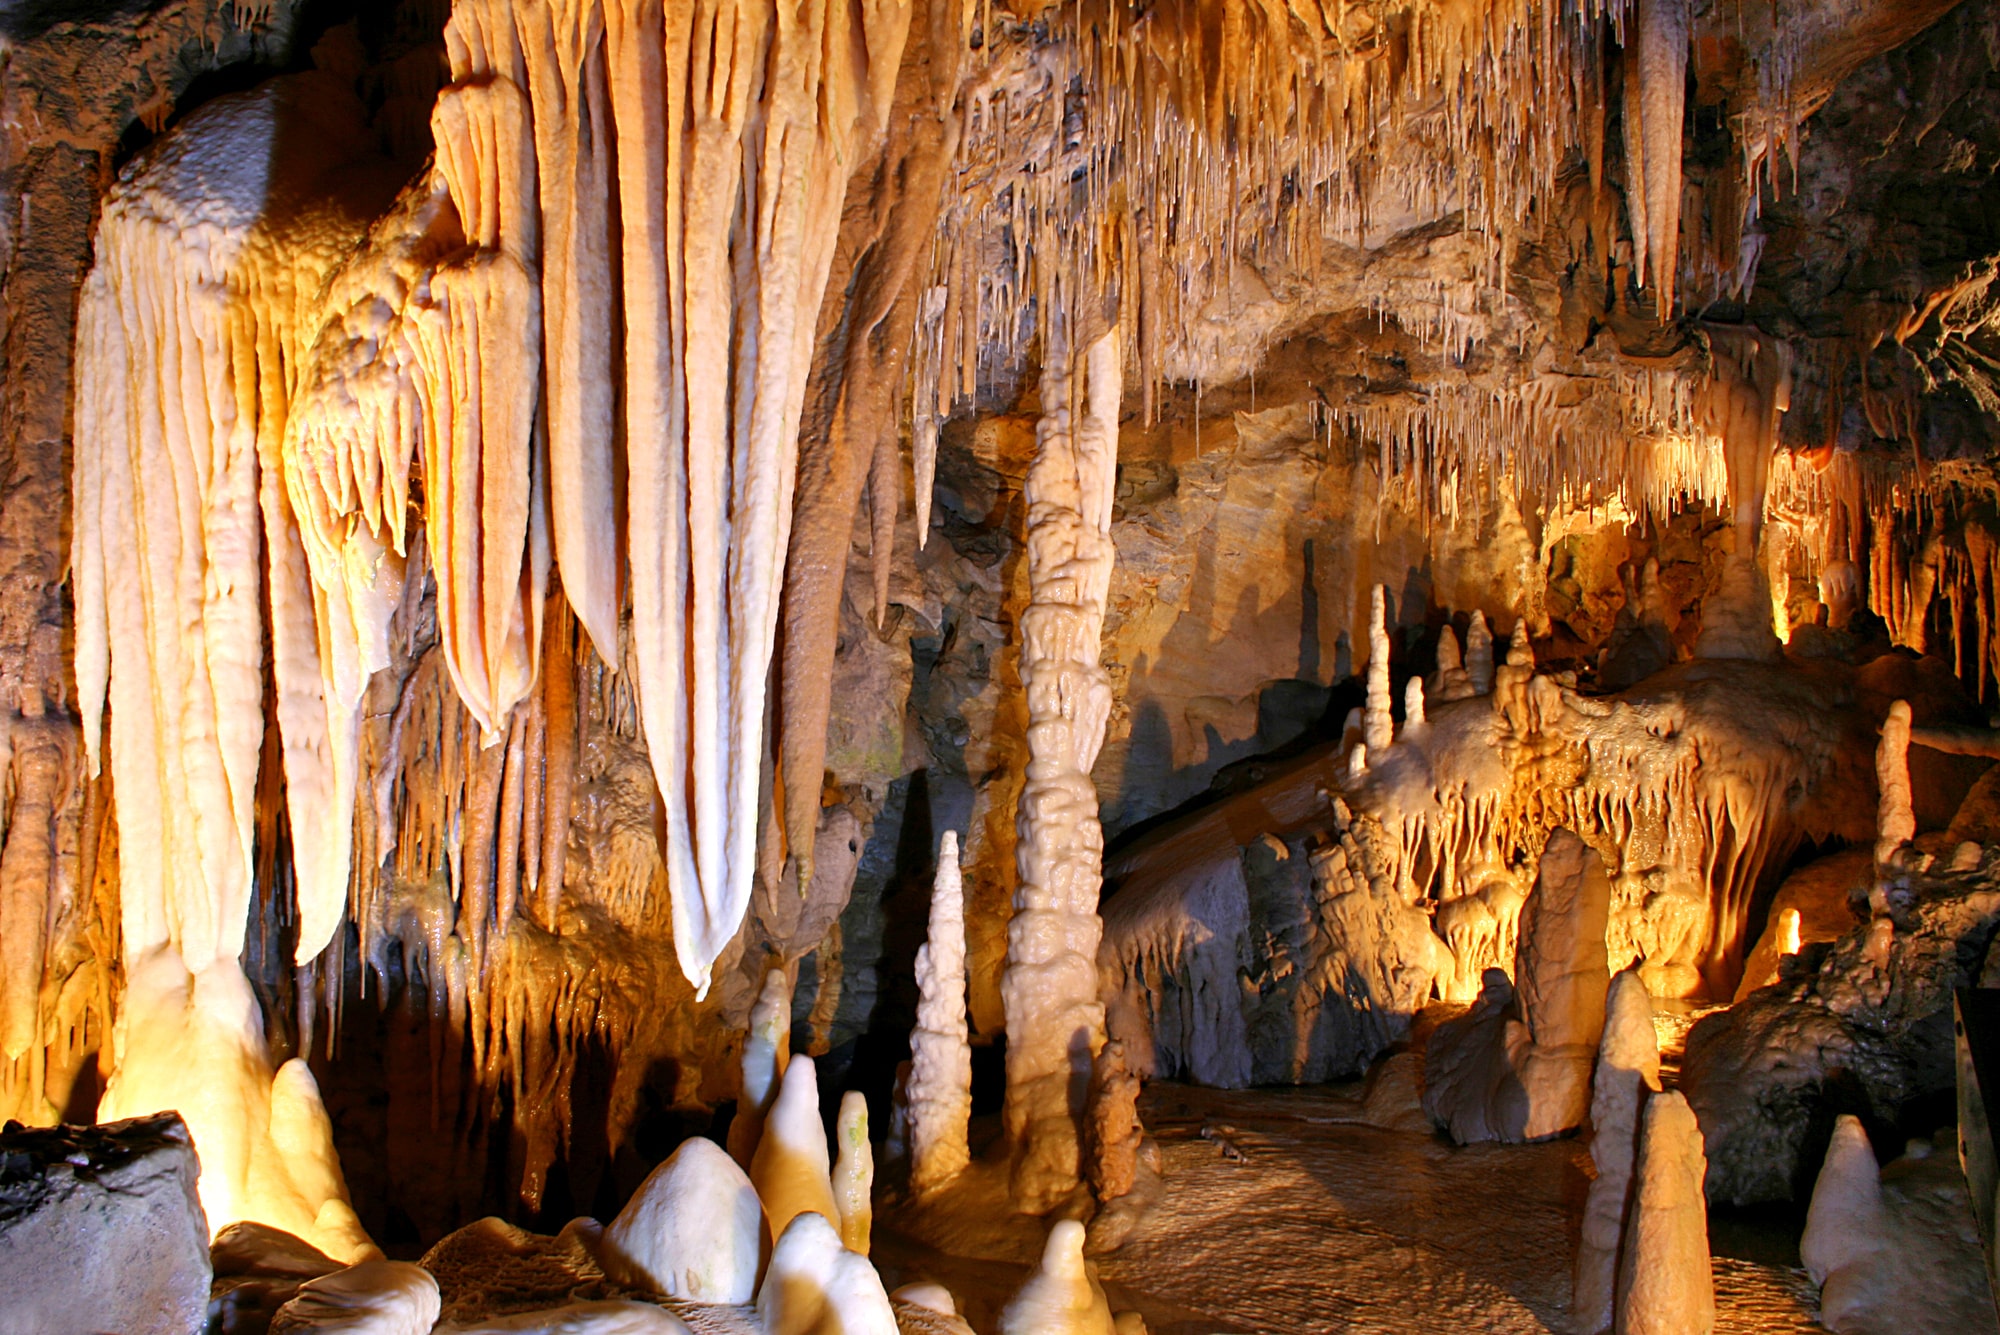 Homeschool Road Trip to Explore the World’s Longest Cave System!